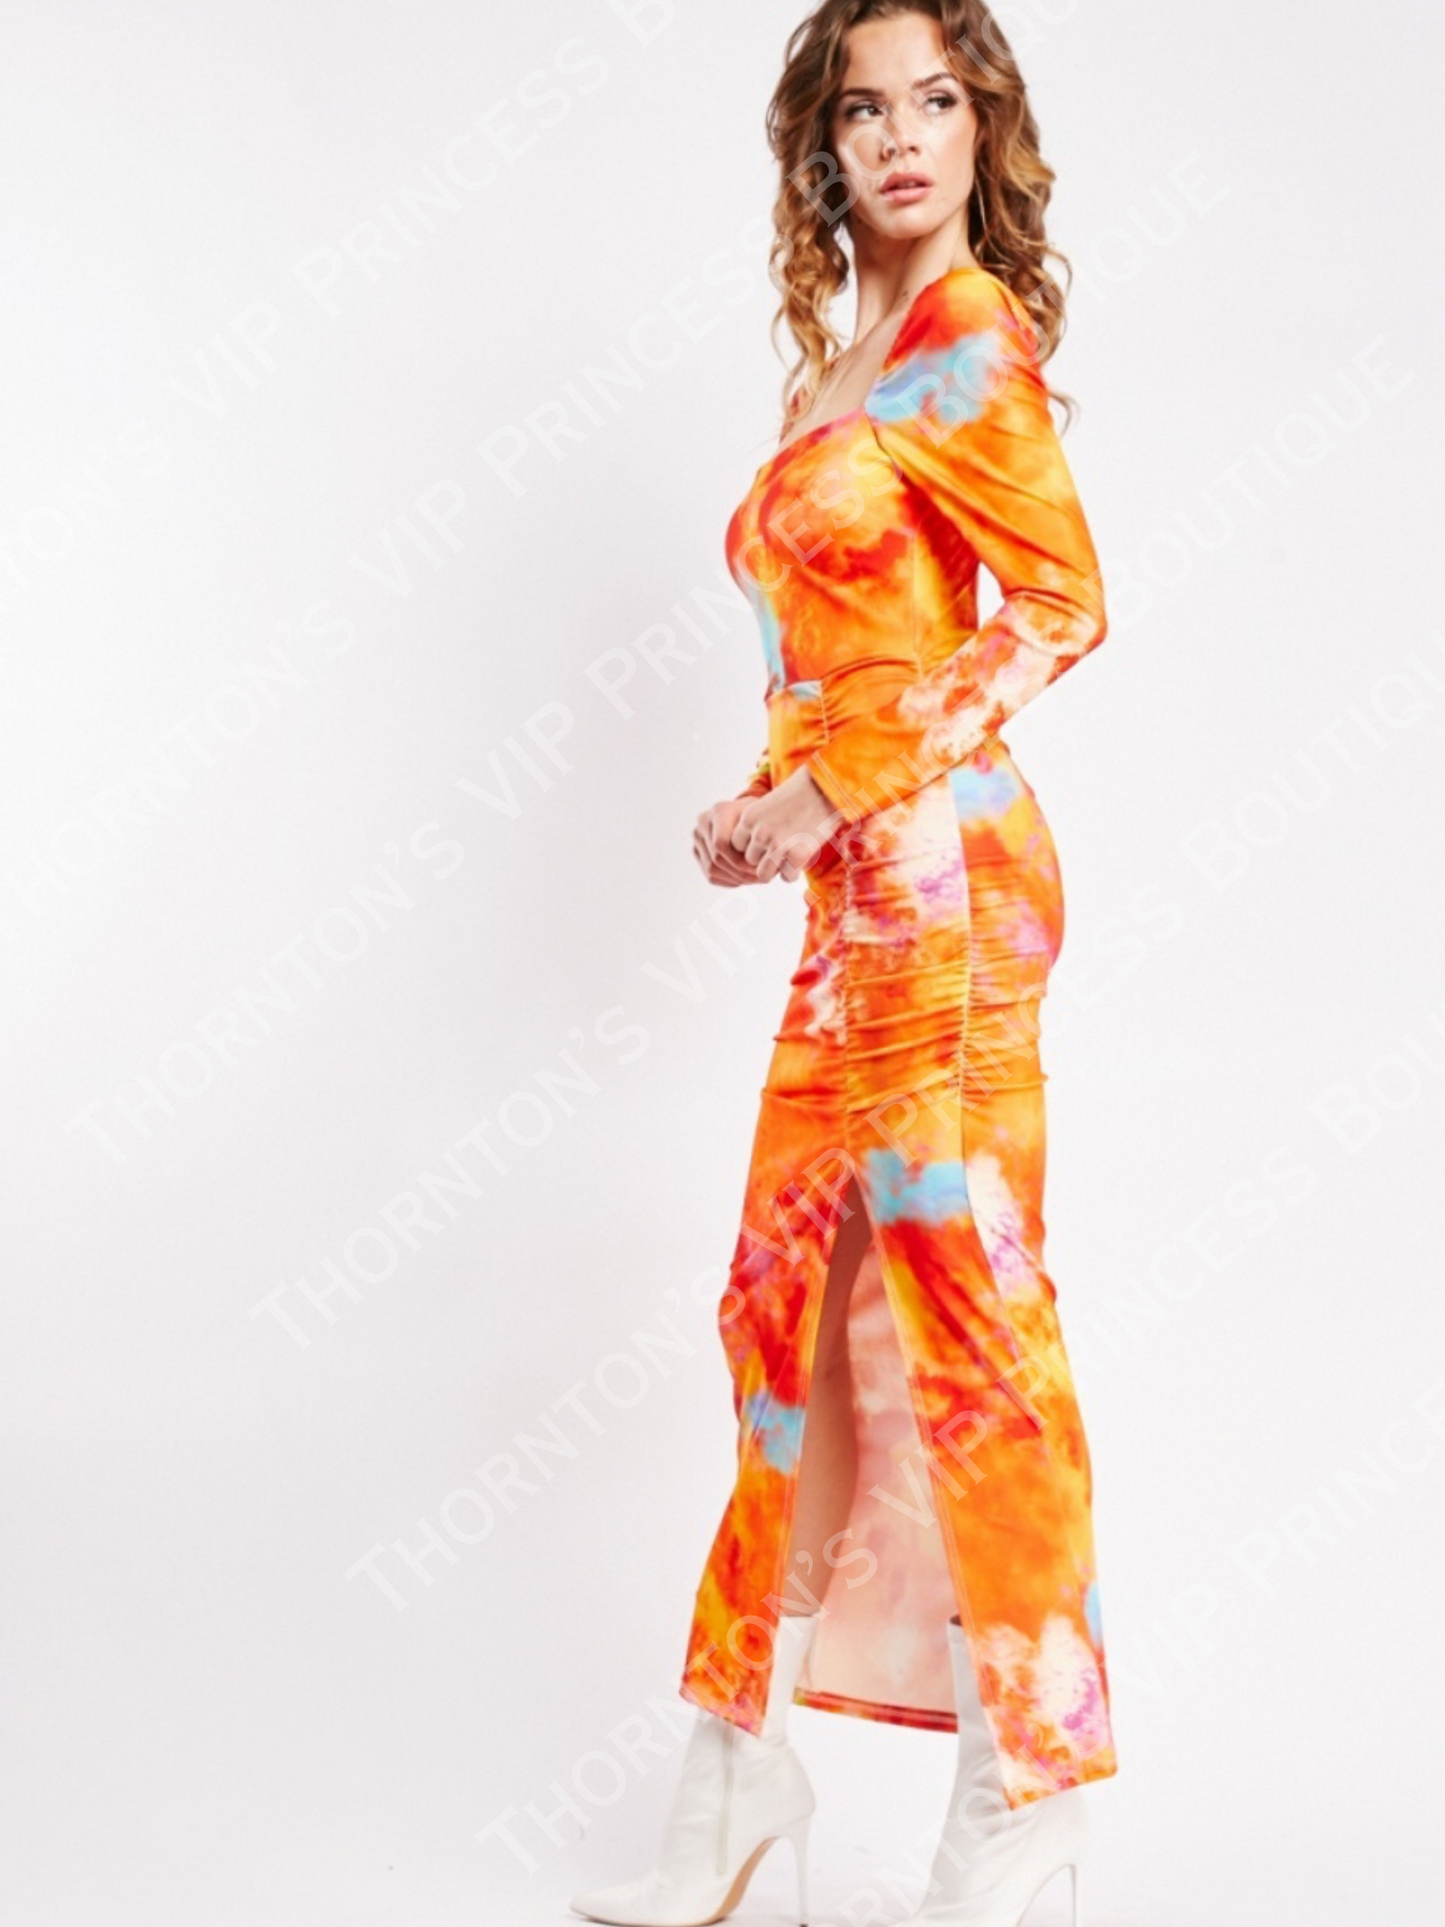 The Dyed Print Maxi Dress